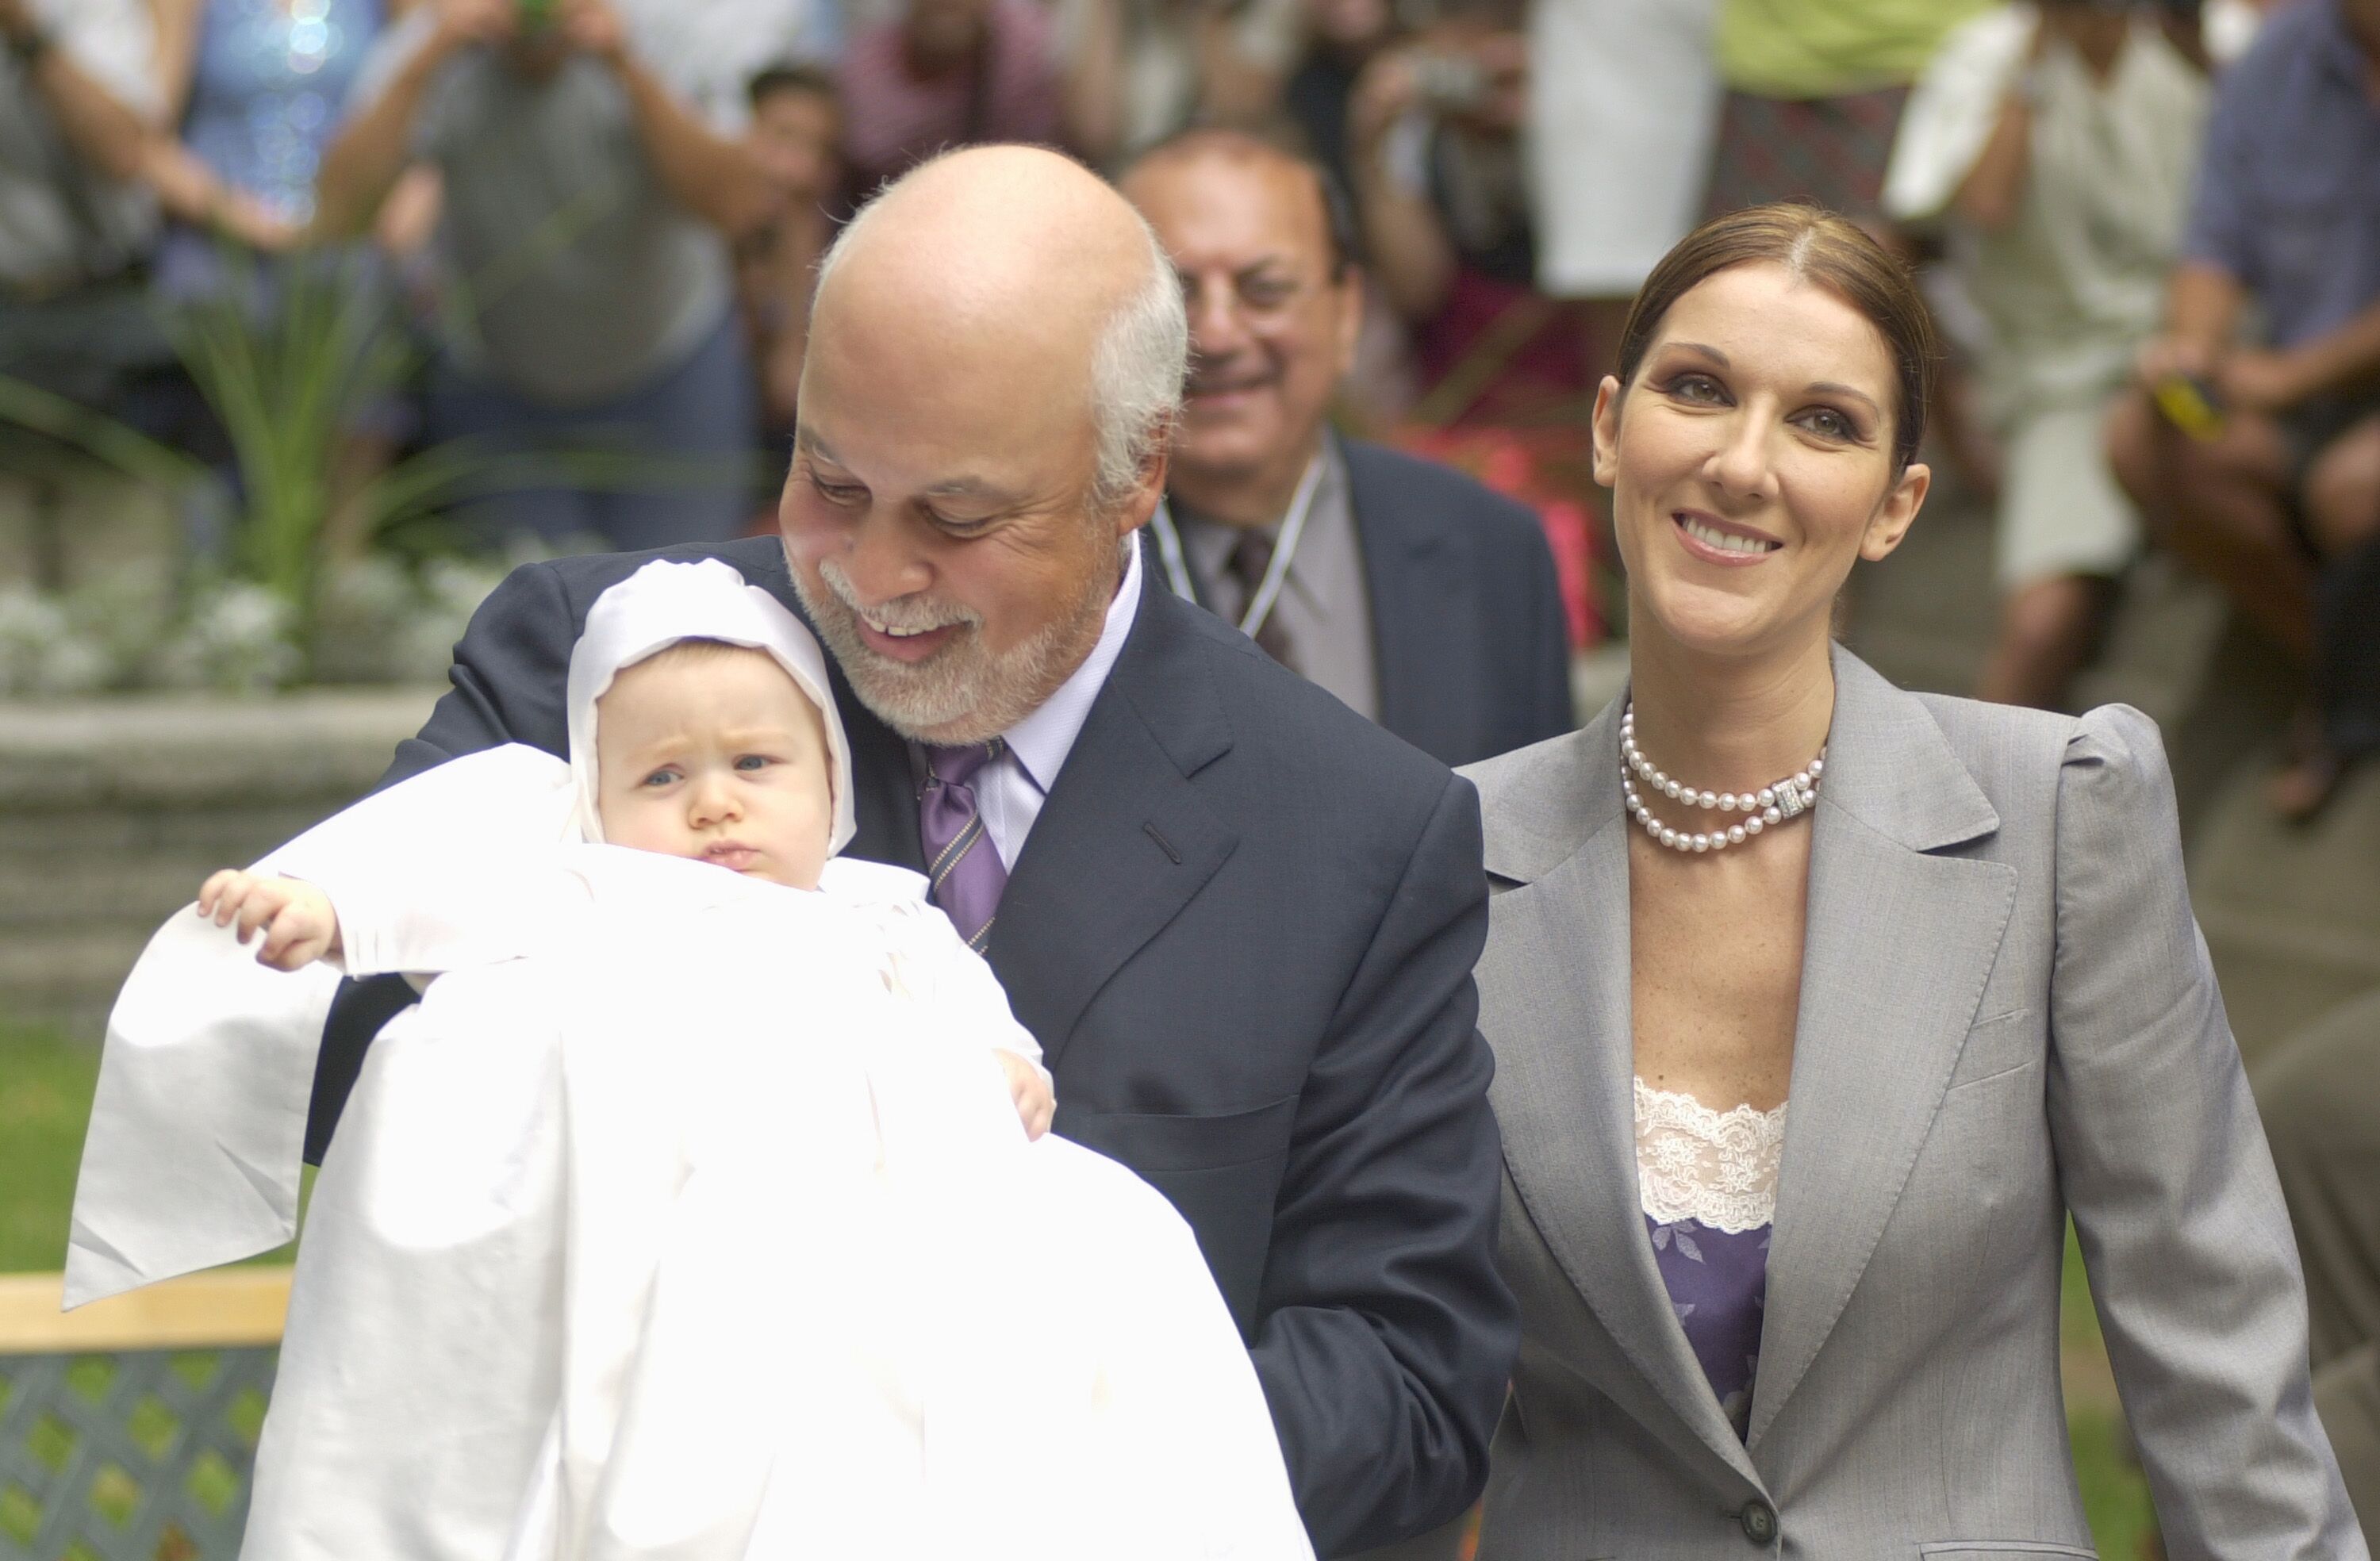  Celine Dion and husband Rene Angelil with their baby Rene-Charles outside the chapel of the Notre-Dame Basilica in Montreal | Source: Getty Images